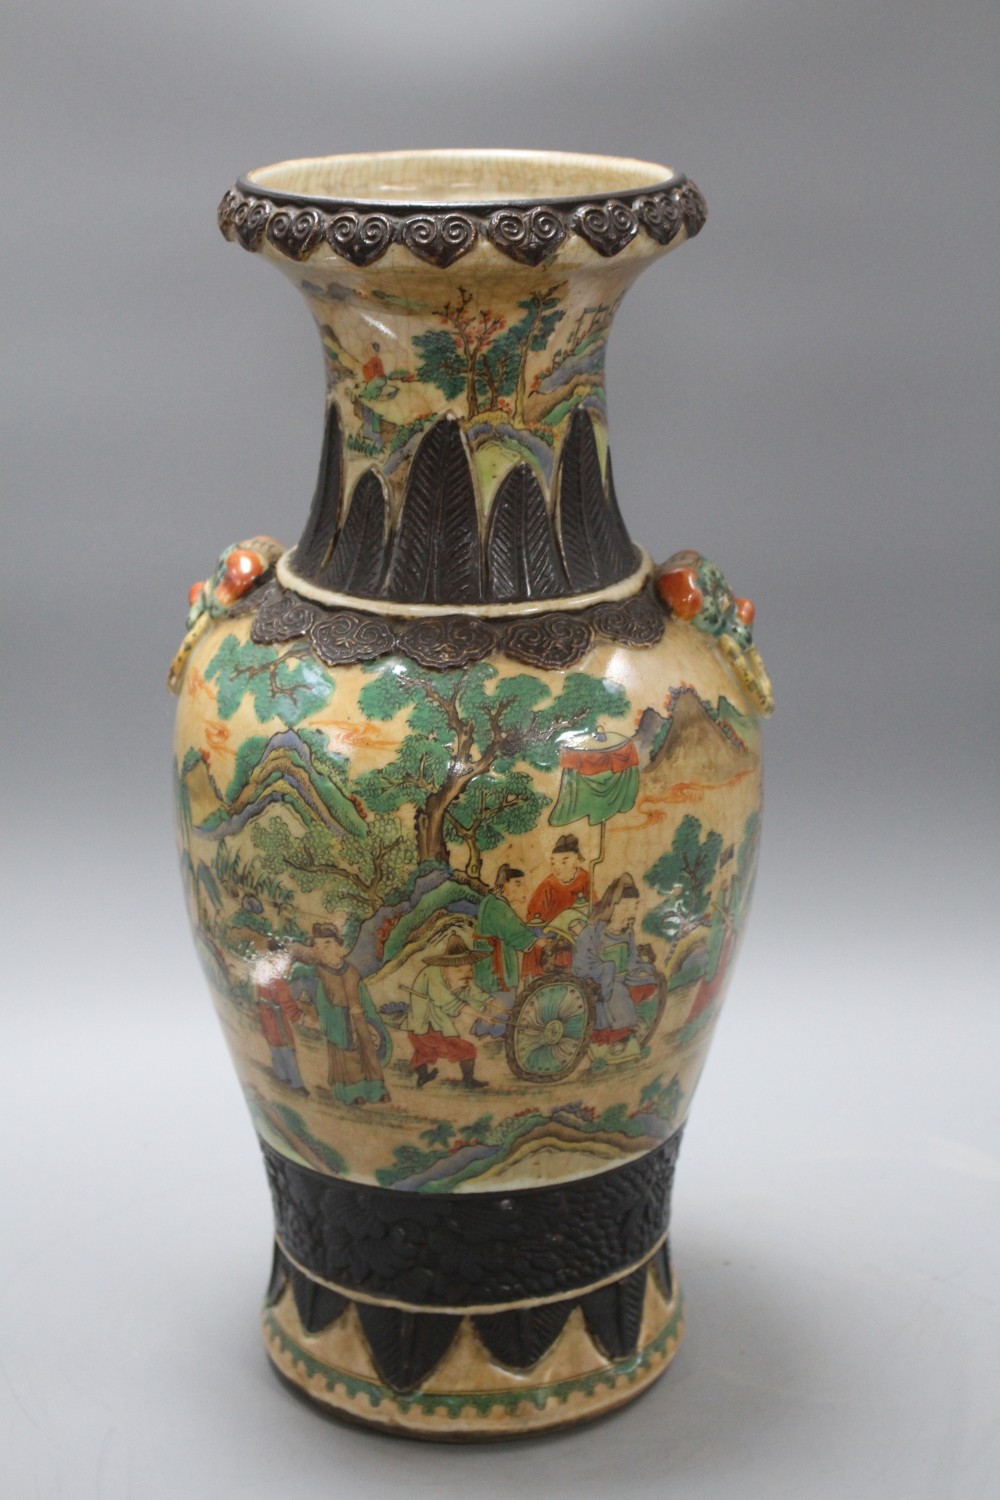 A late 19th century Chinese crackle glaze vase, decorated with figures in a continuous landscape, height 46cm